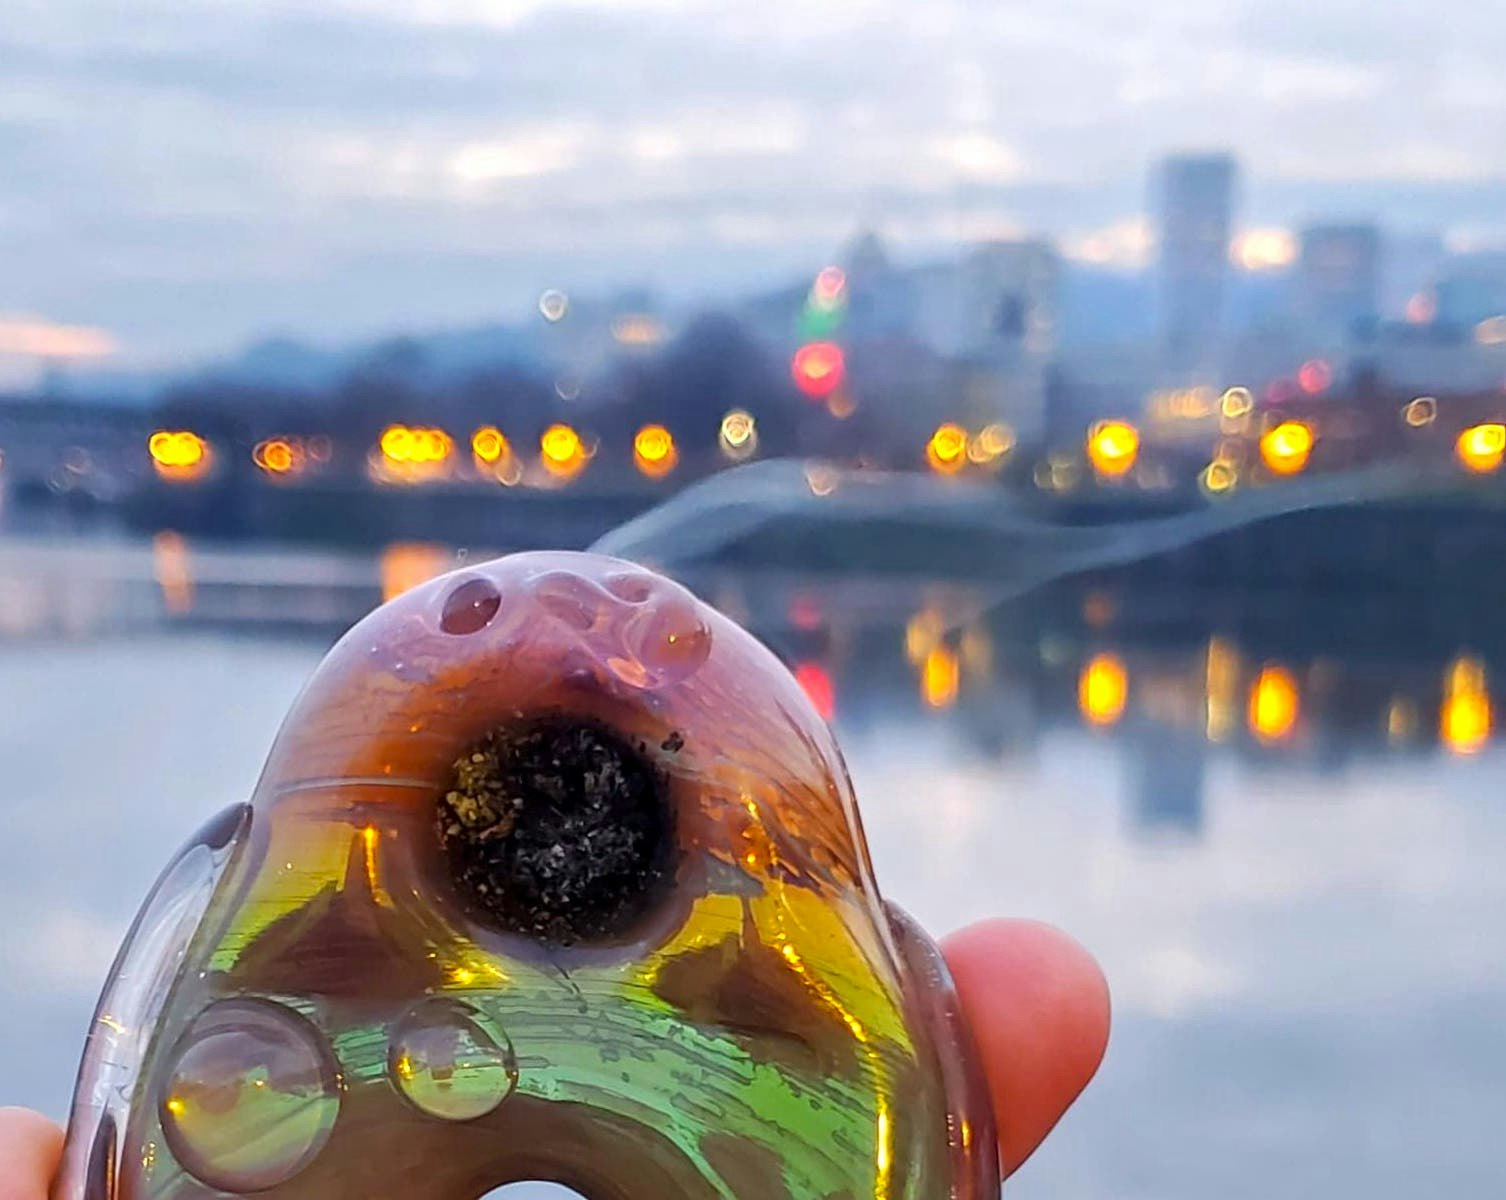 A rainbow-hued pipe packed with cannabis is held up in front of the Portland, Oregon skyline at dusk